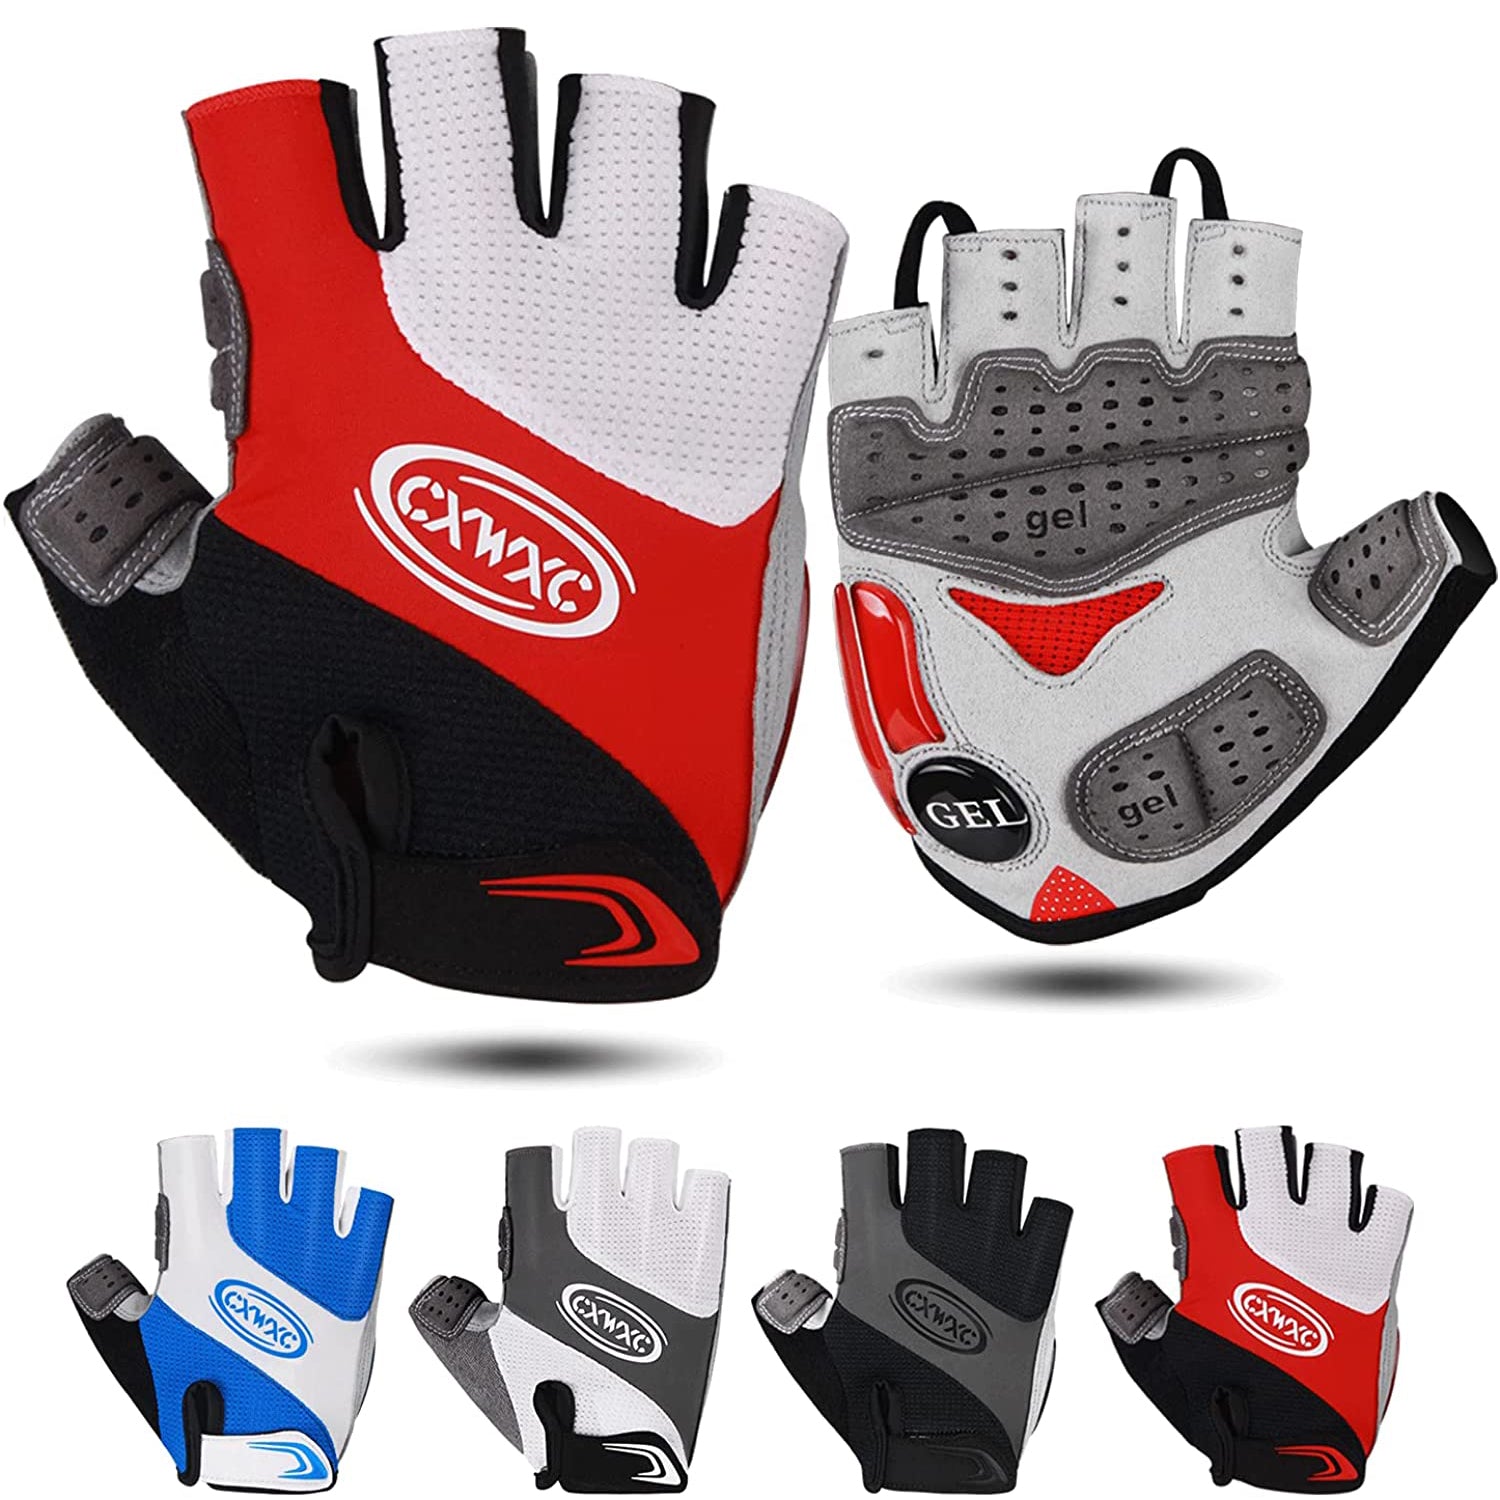 Cycling Gloves for Men Women - Breathable Gel Road Mountain Bike Riding Gloves - Anti-Slip Half Finger Glove for Fitness Cycling Training